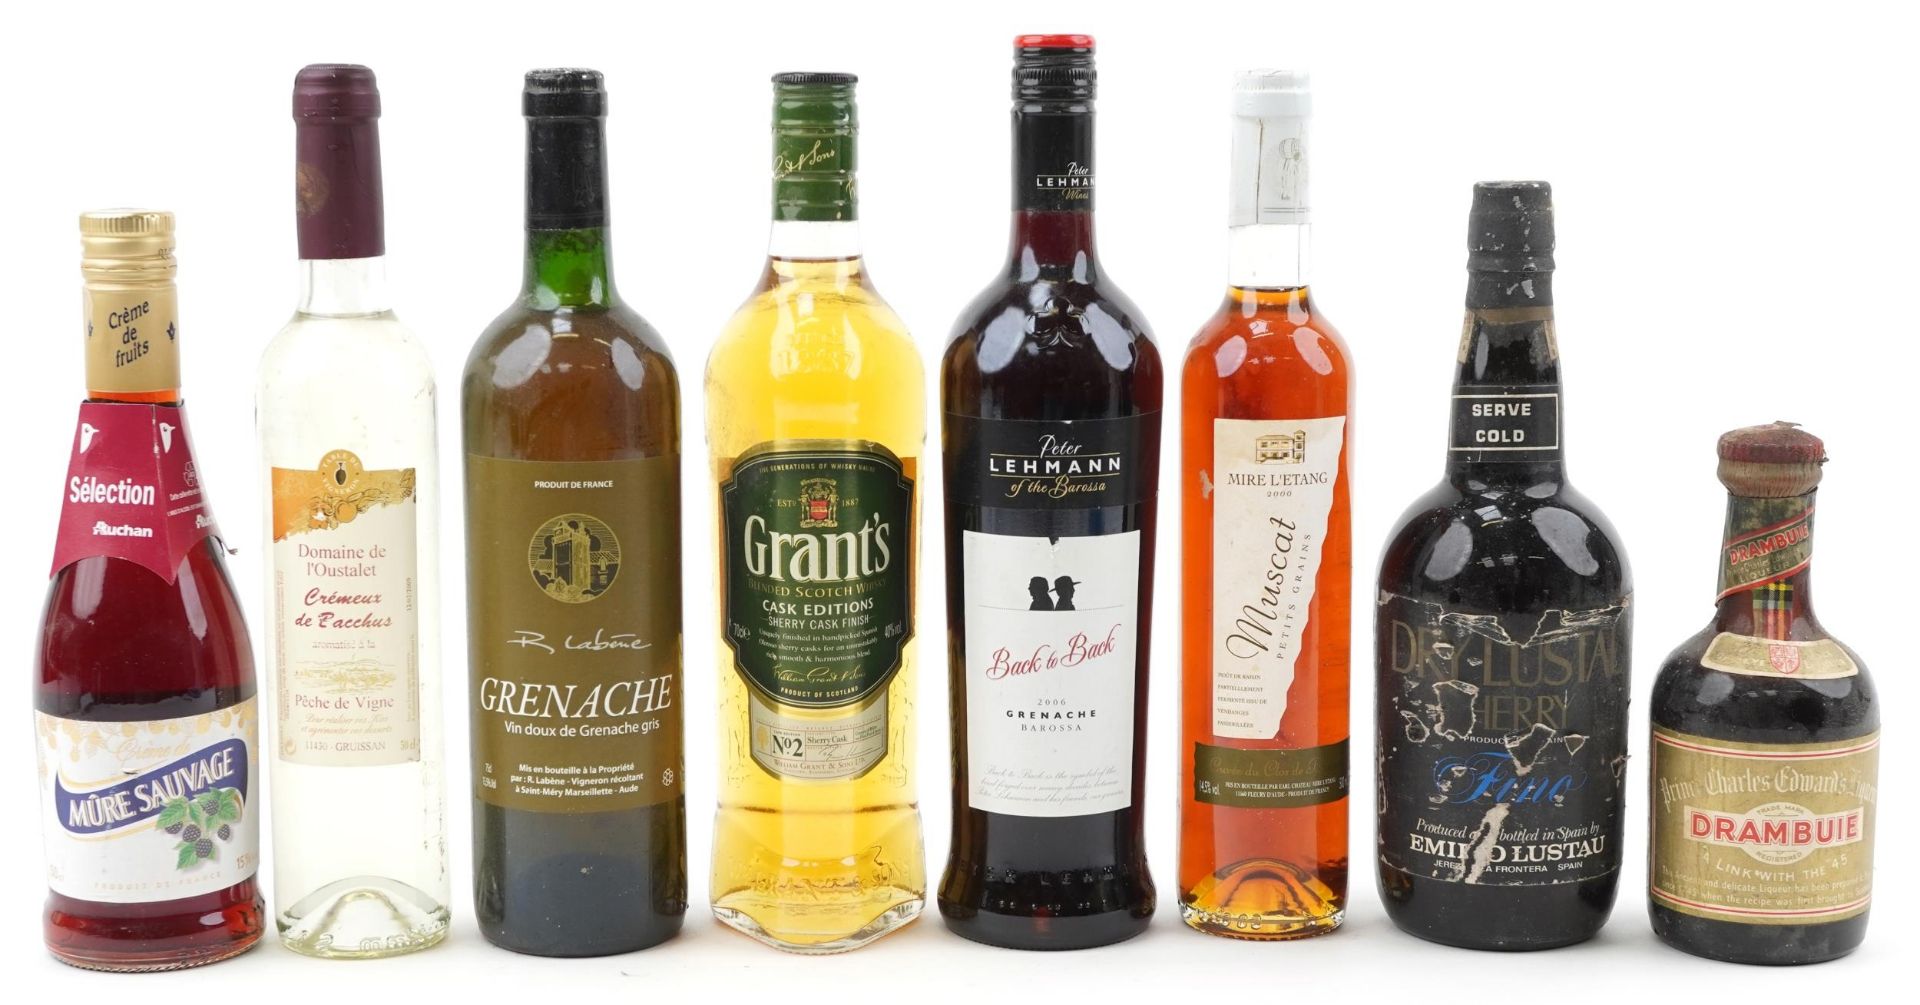 Eight bottles of alcohol including Grant's Cask Edition whisky and Drambuie